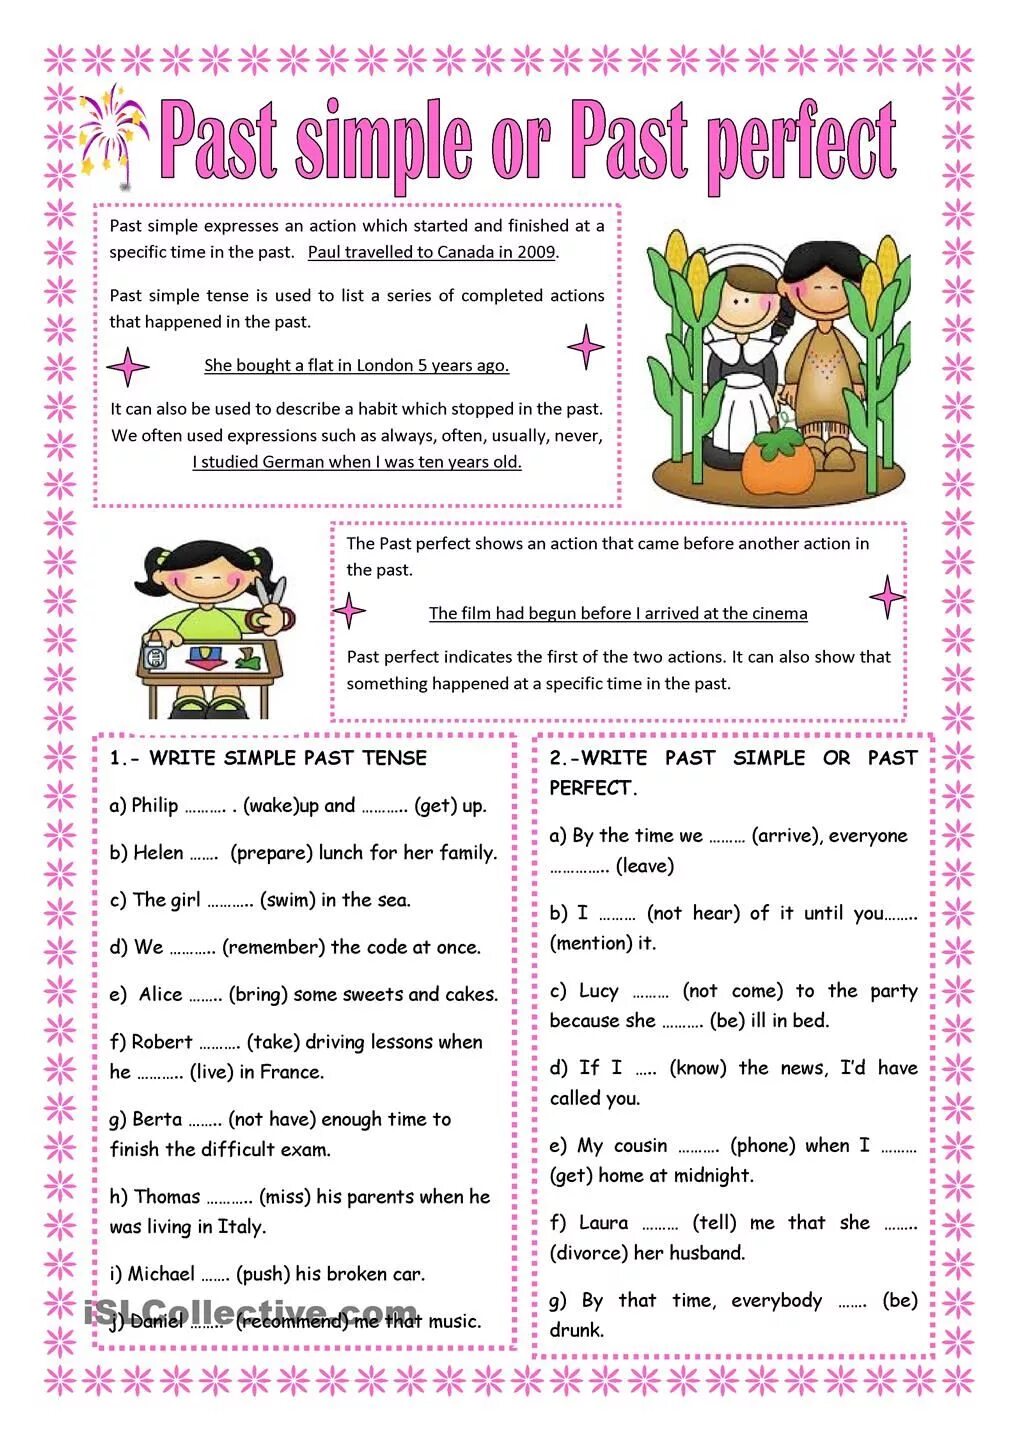 Past simple vs past perfect Worksheets. Present perfect vs past simple exercise. Present perfect past simple упражнения. Past simple present perfect past perfect упражнения. Past perfect tense exercises